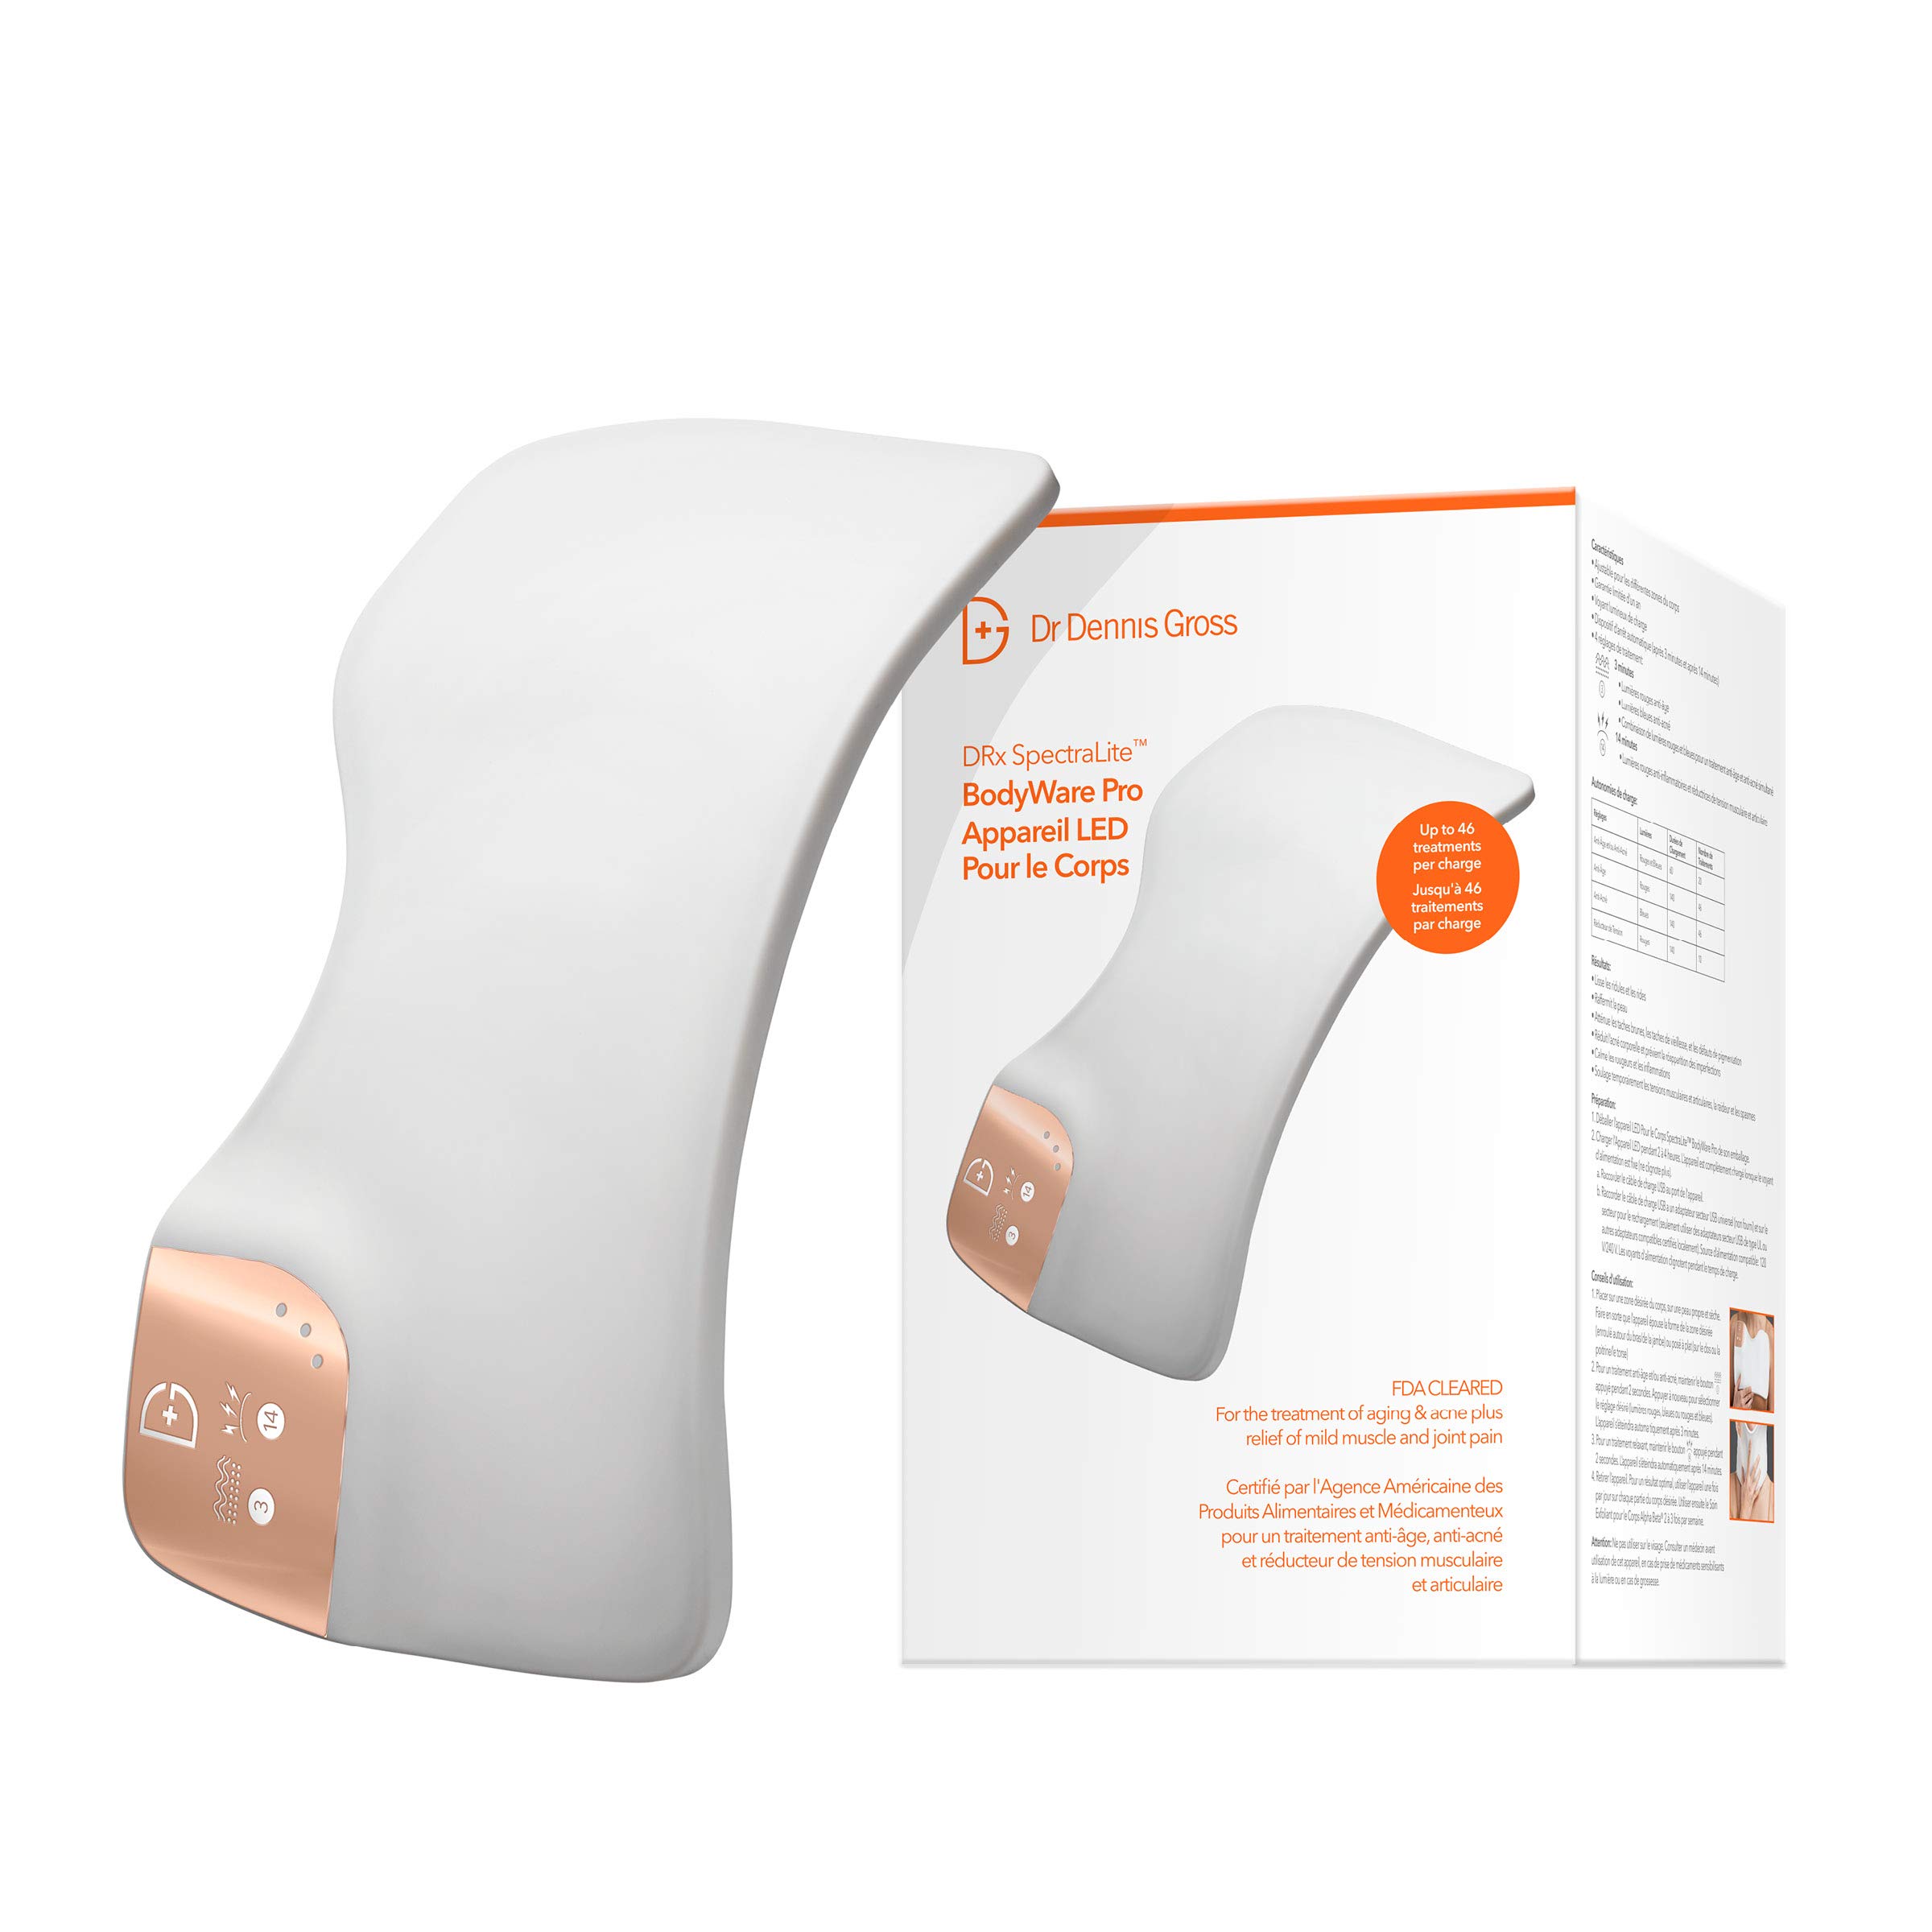 Dr Dennis Gross Dpl IIa Panel DRx SpectraLite BodyWare Pro: FDA Cleared Light Therapy Device Treats Aging & Acne & Relieves Mild Muscle & Joint Pain